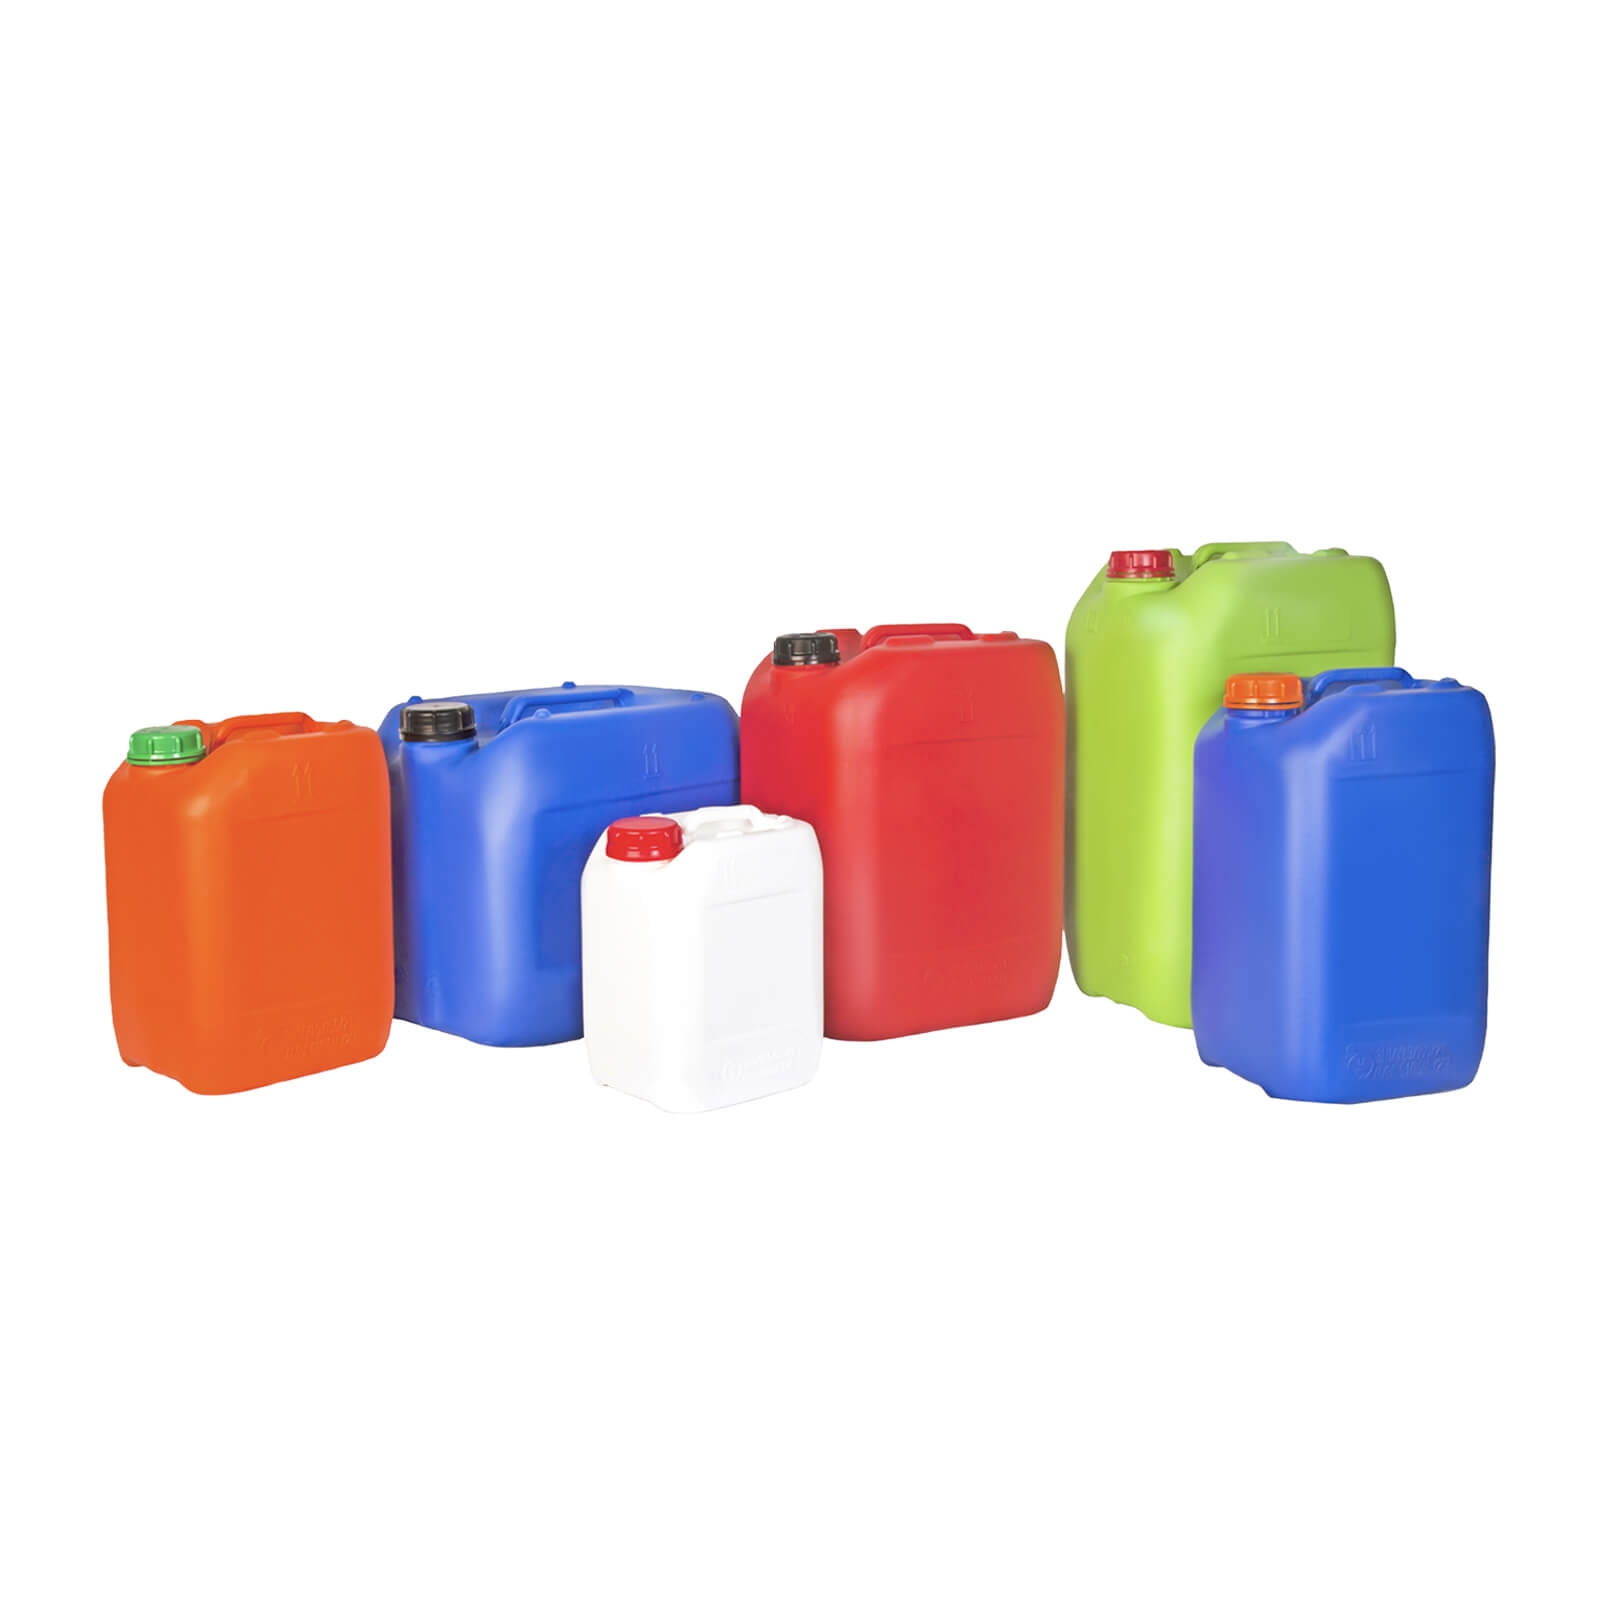 Euro-Jerrycan-group_secondary